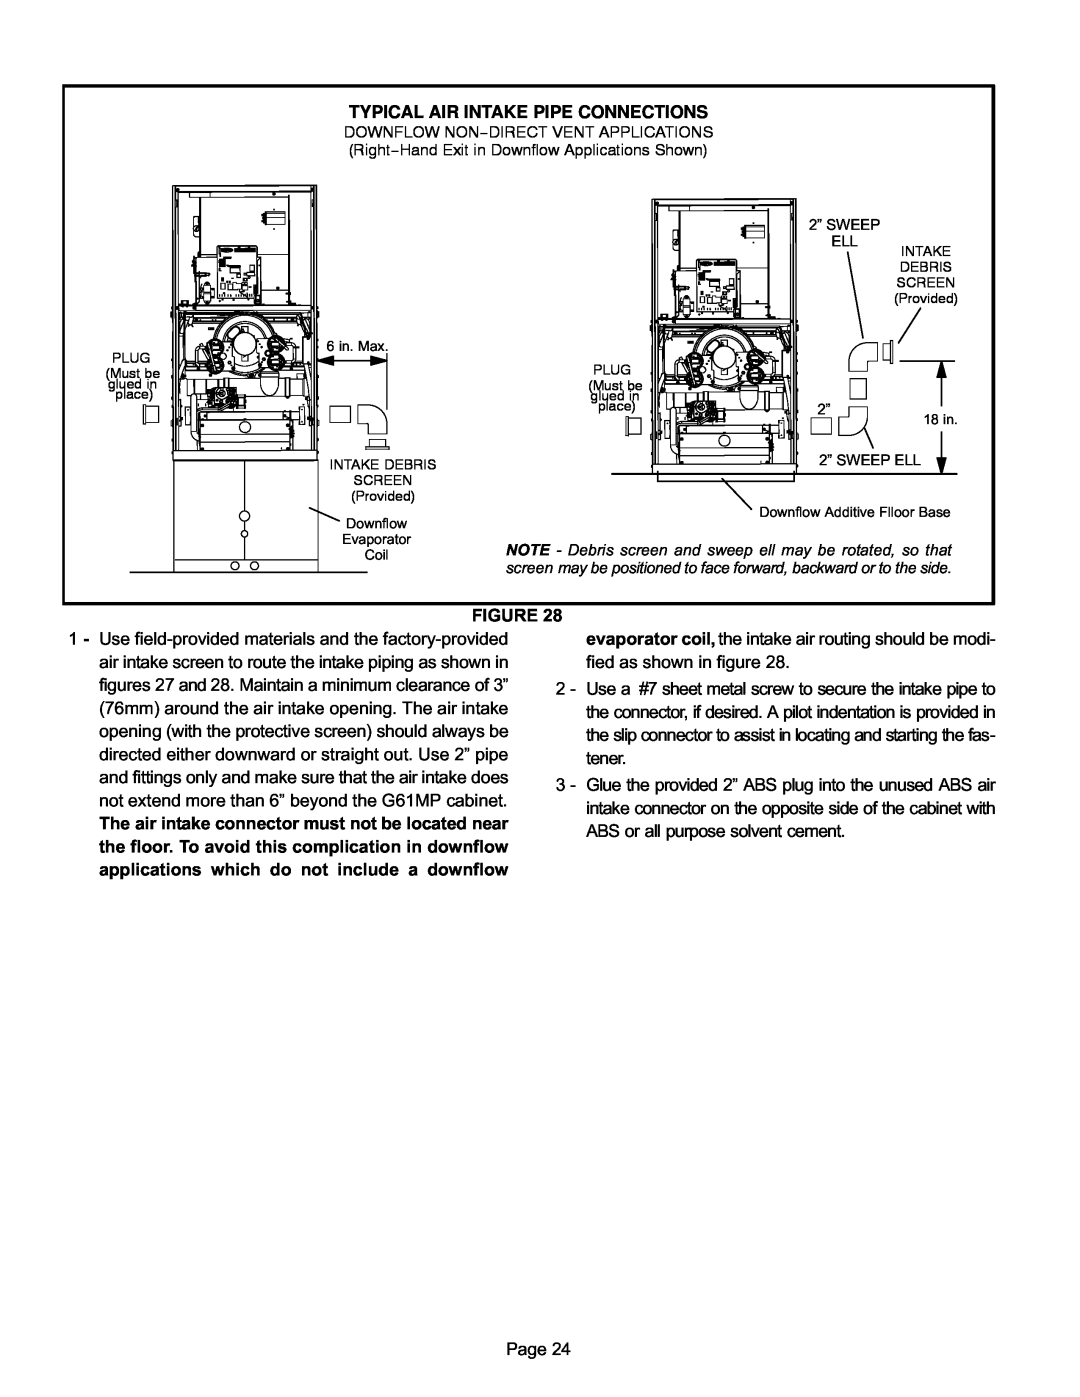 Lennox International Inc Gas Units, G61MP Series Units installation instructions Typical Air Intake Pipe Connections 